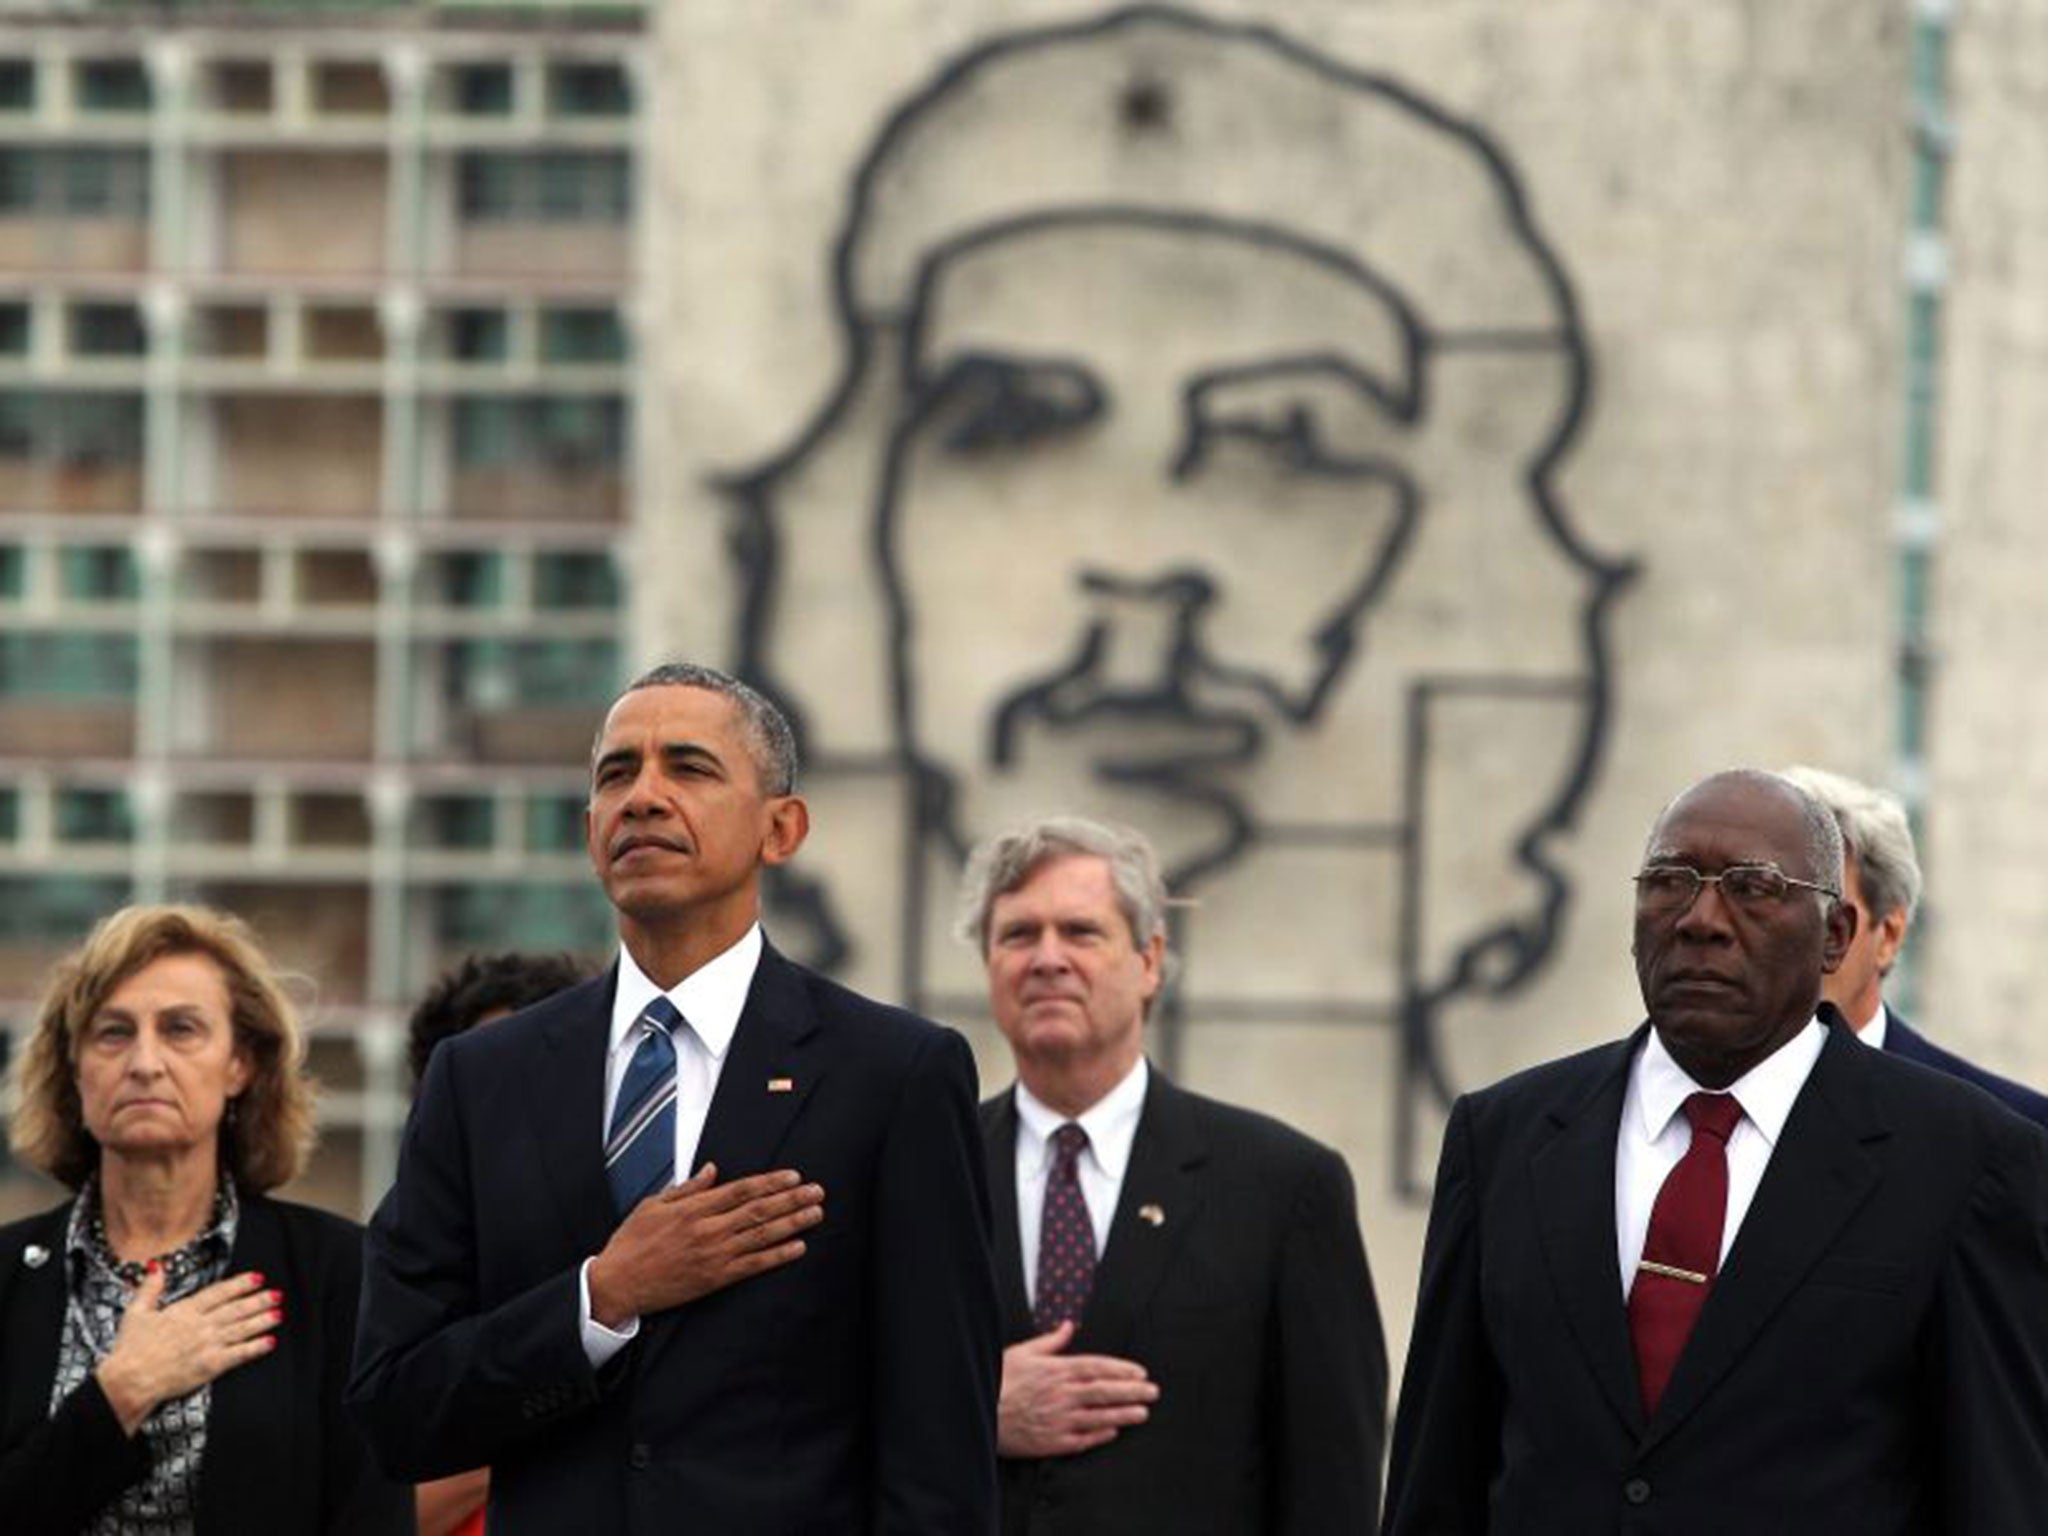 President Obama stands for the US national anthem beneath an image of Che Guevara in Havana